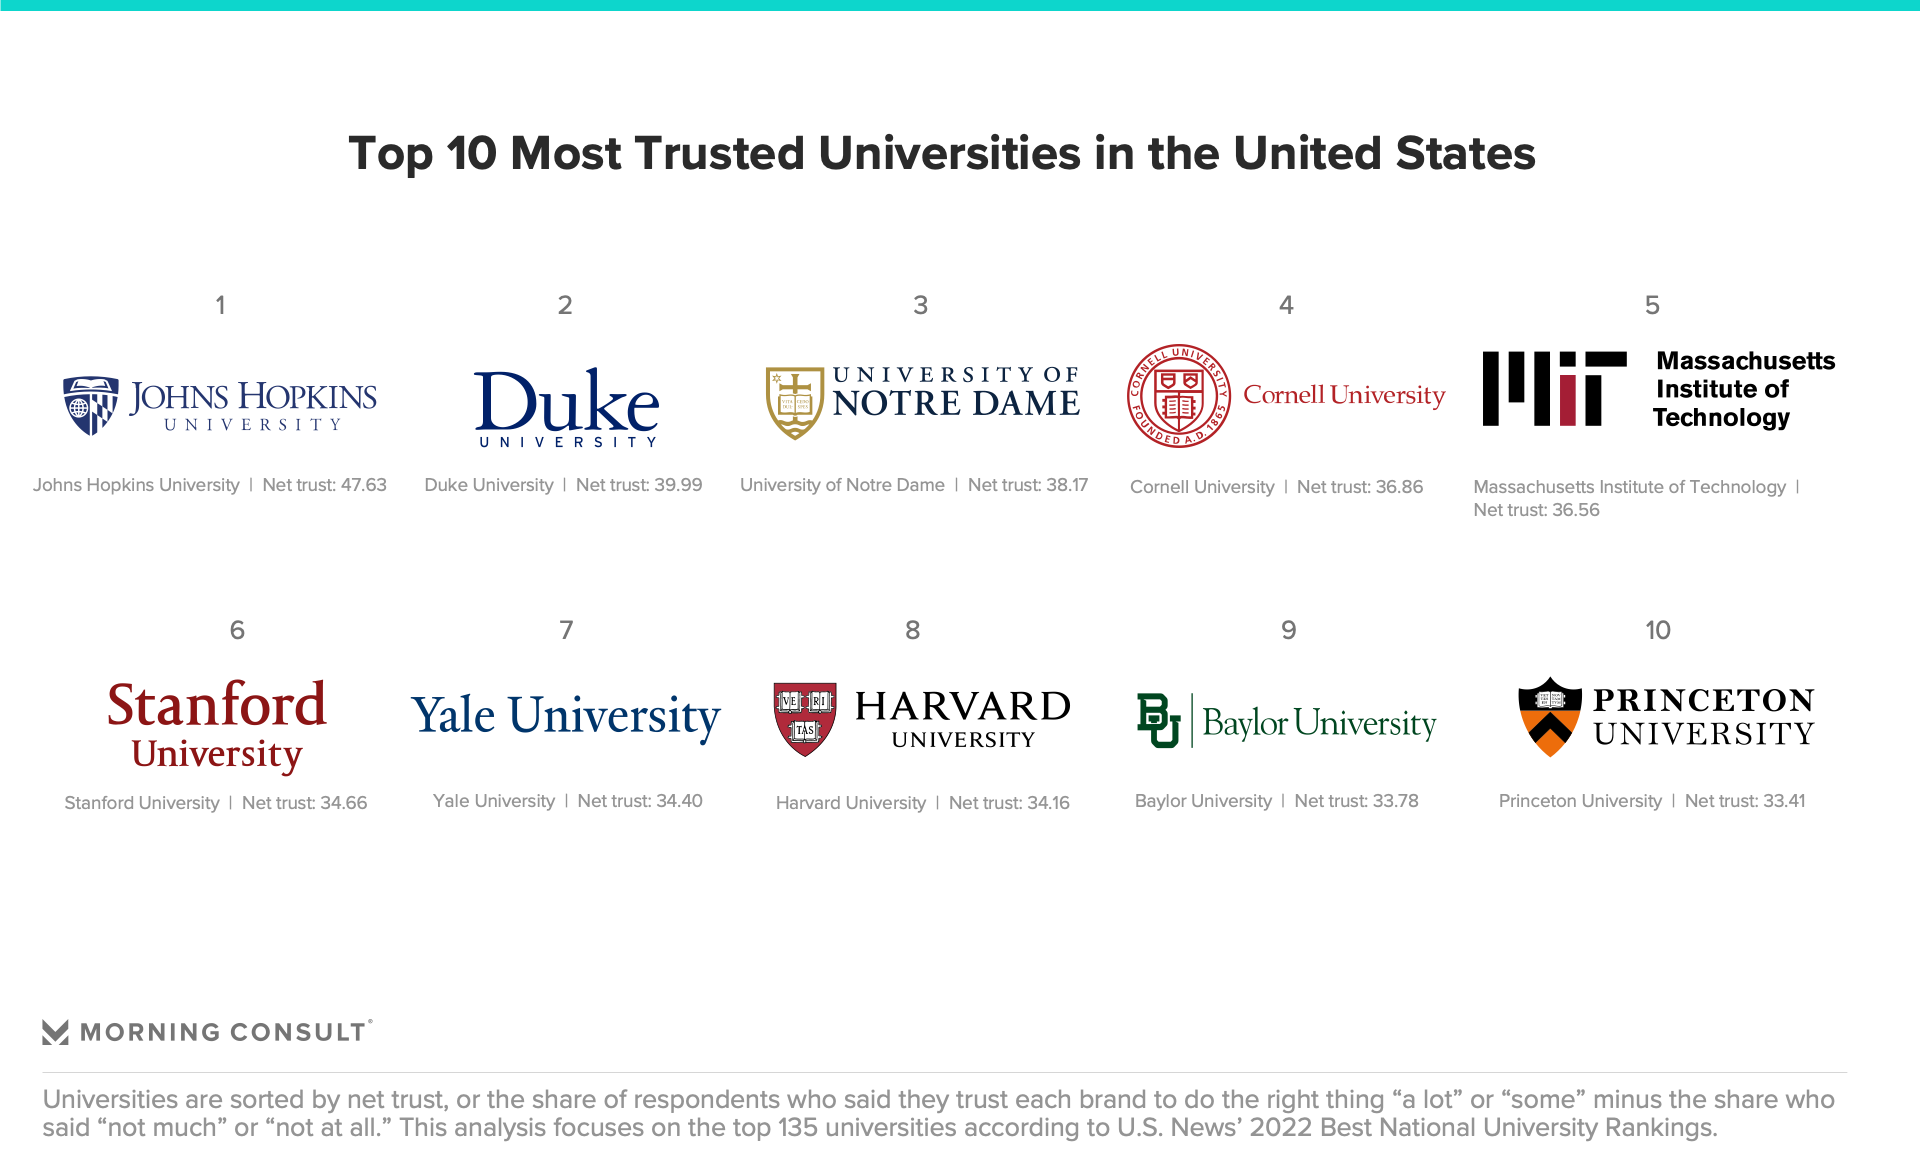 Ranking of the top 10 most trusted higher education institutions